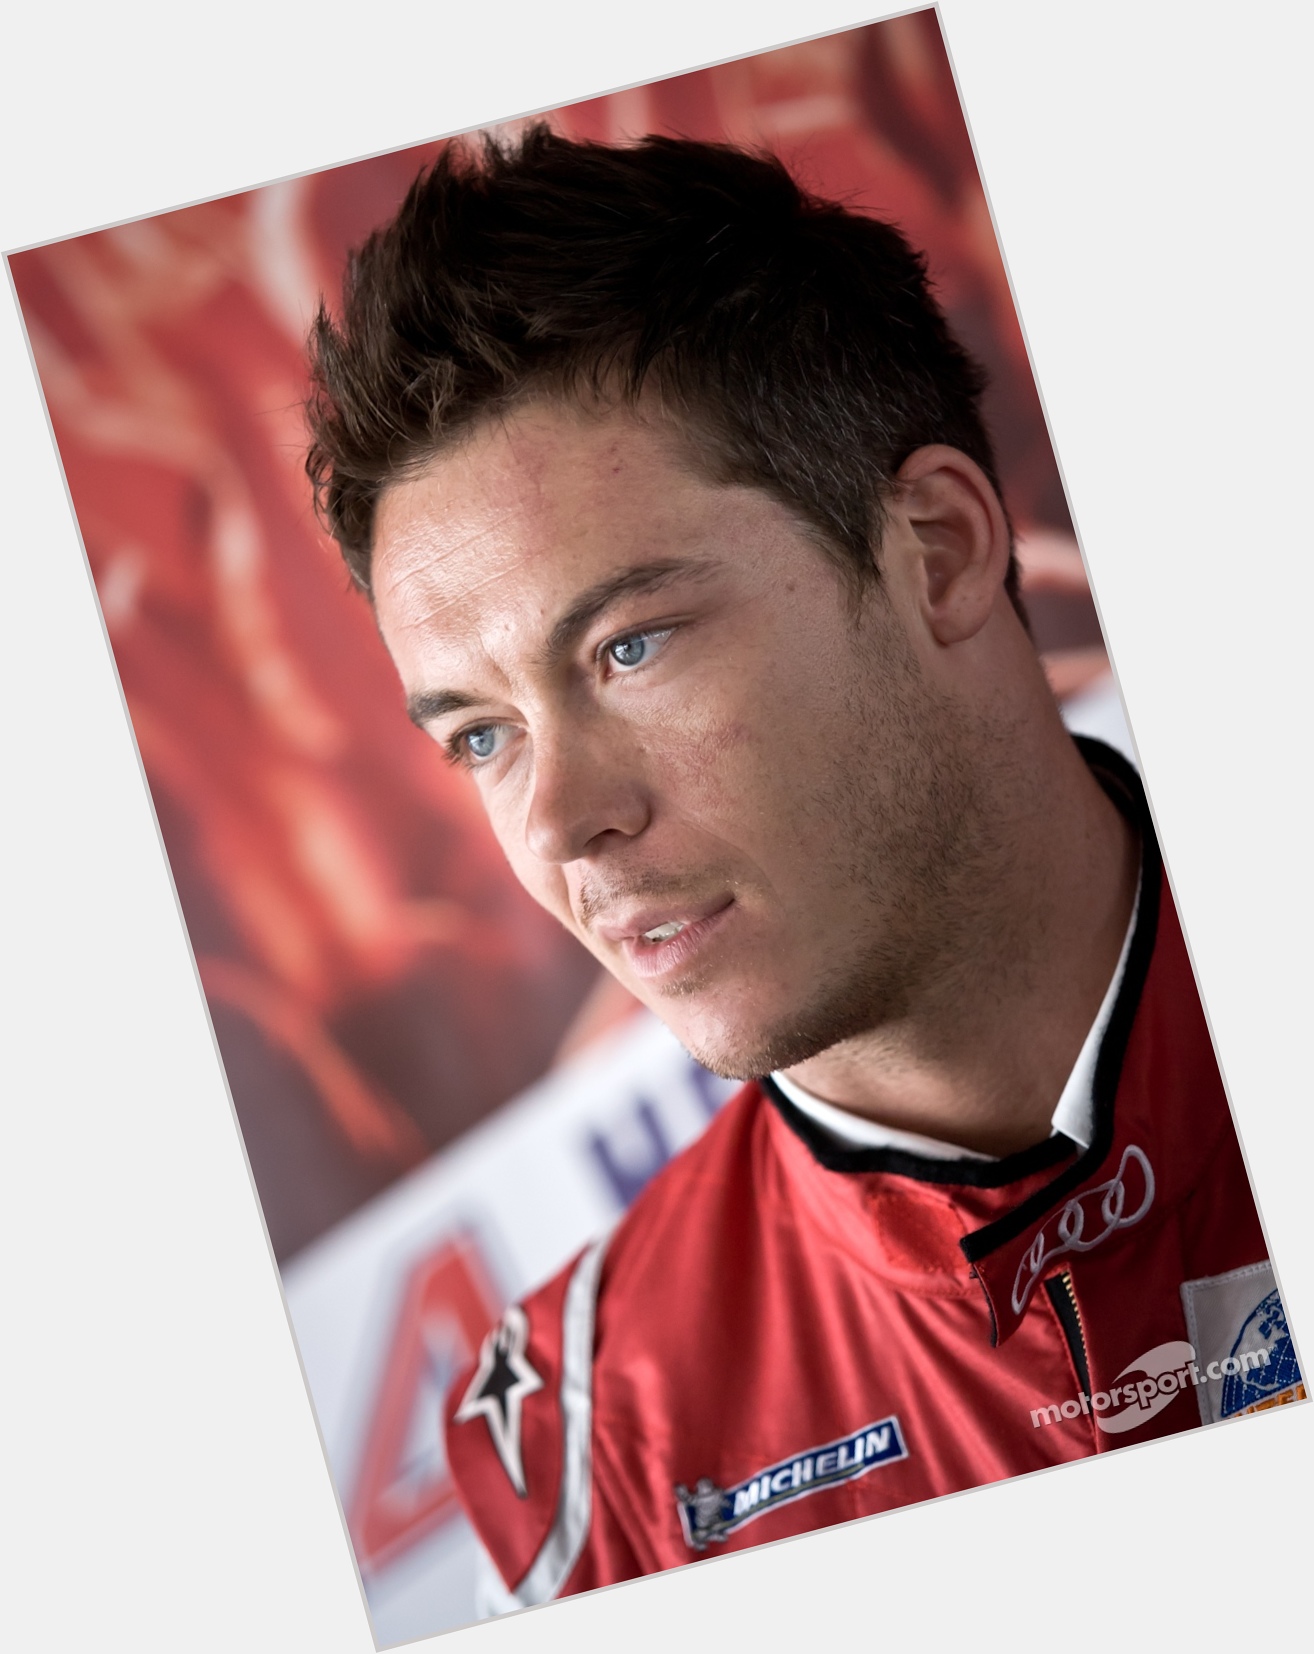 Andre Lotterer light brown hair & hairstyles Athletic body, 